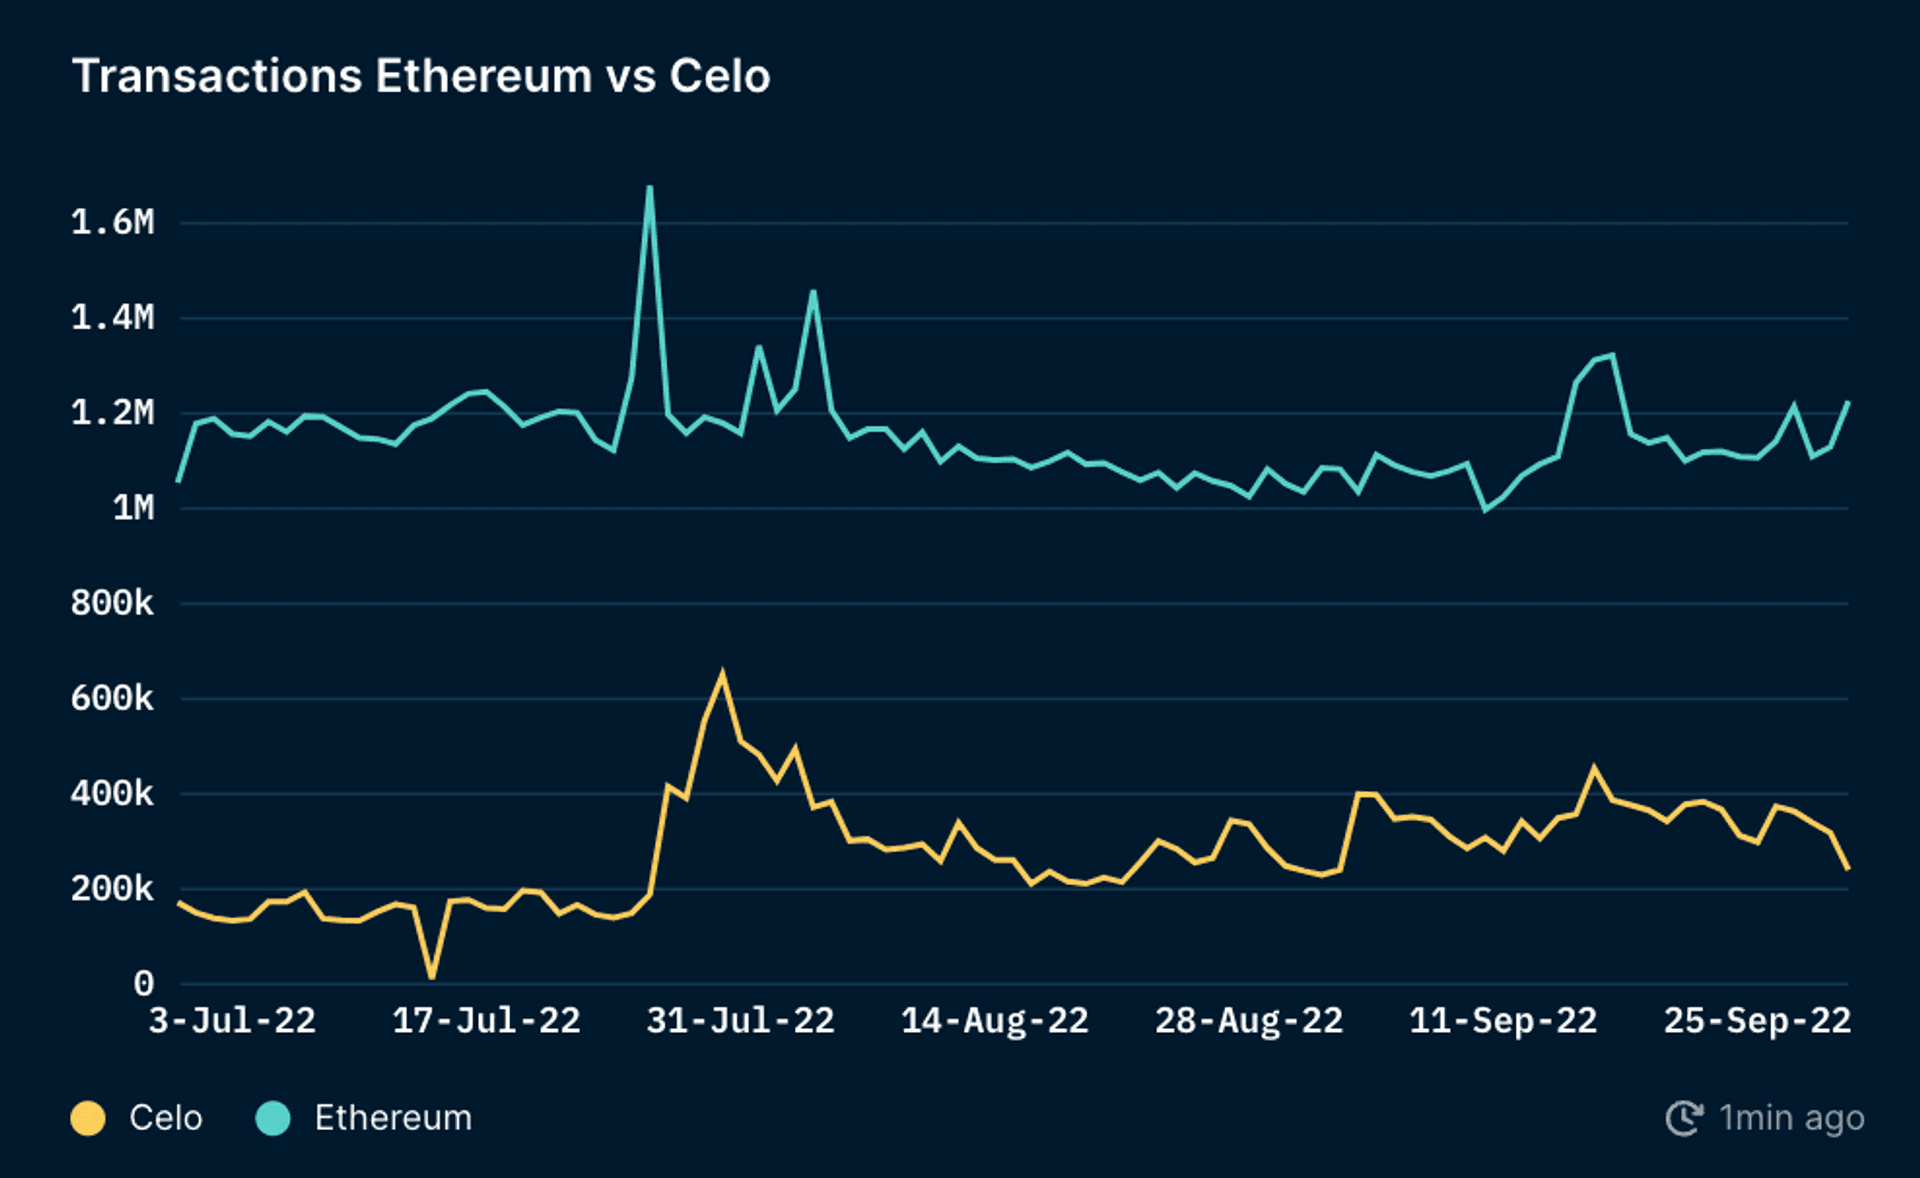 Daily Transactions (vs Ethereum)